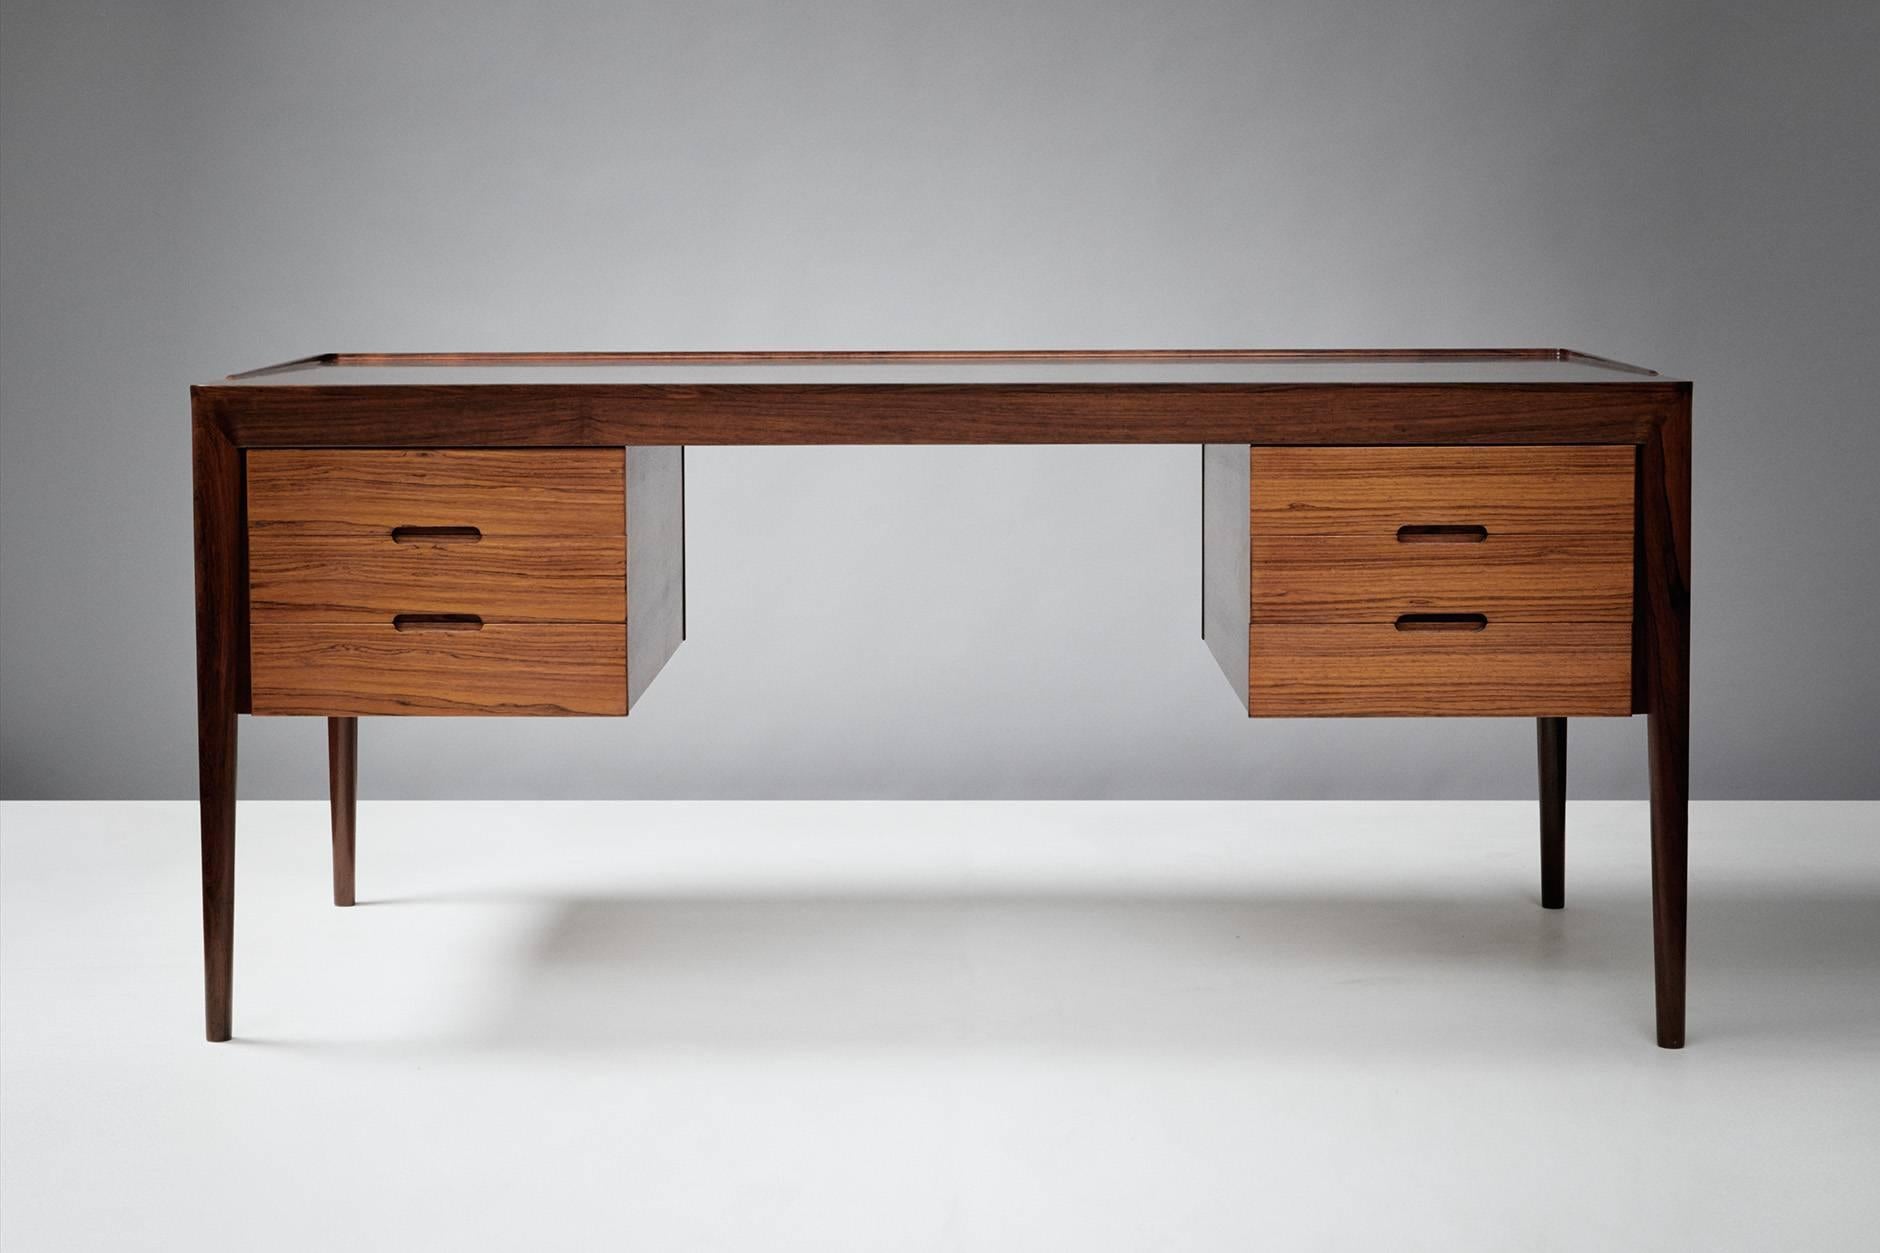 Produced by Haslev Mobelsnedkeri, Denmark. Solid rosewood legs and mouldings with top. 3 drawers either side.